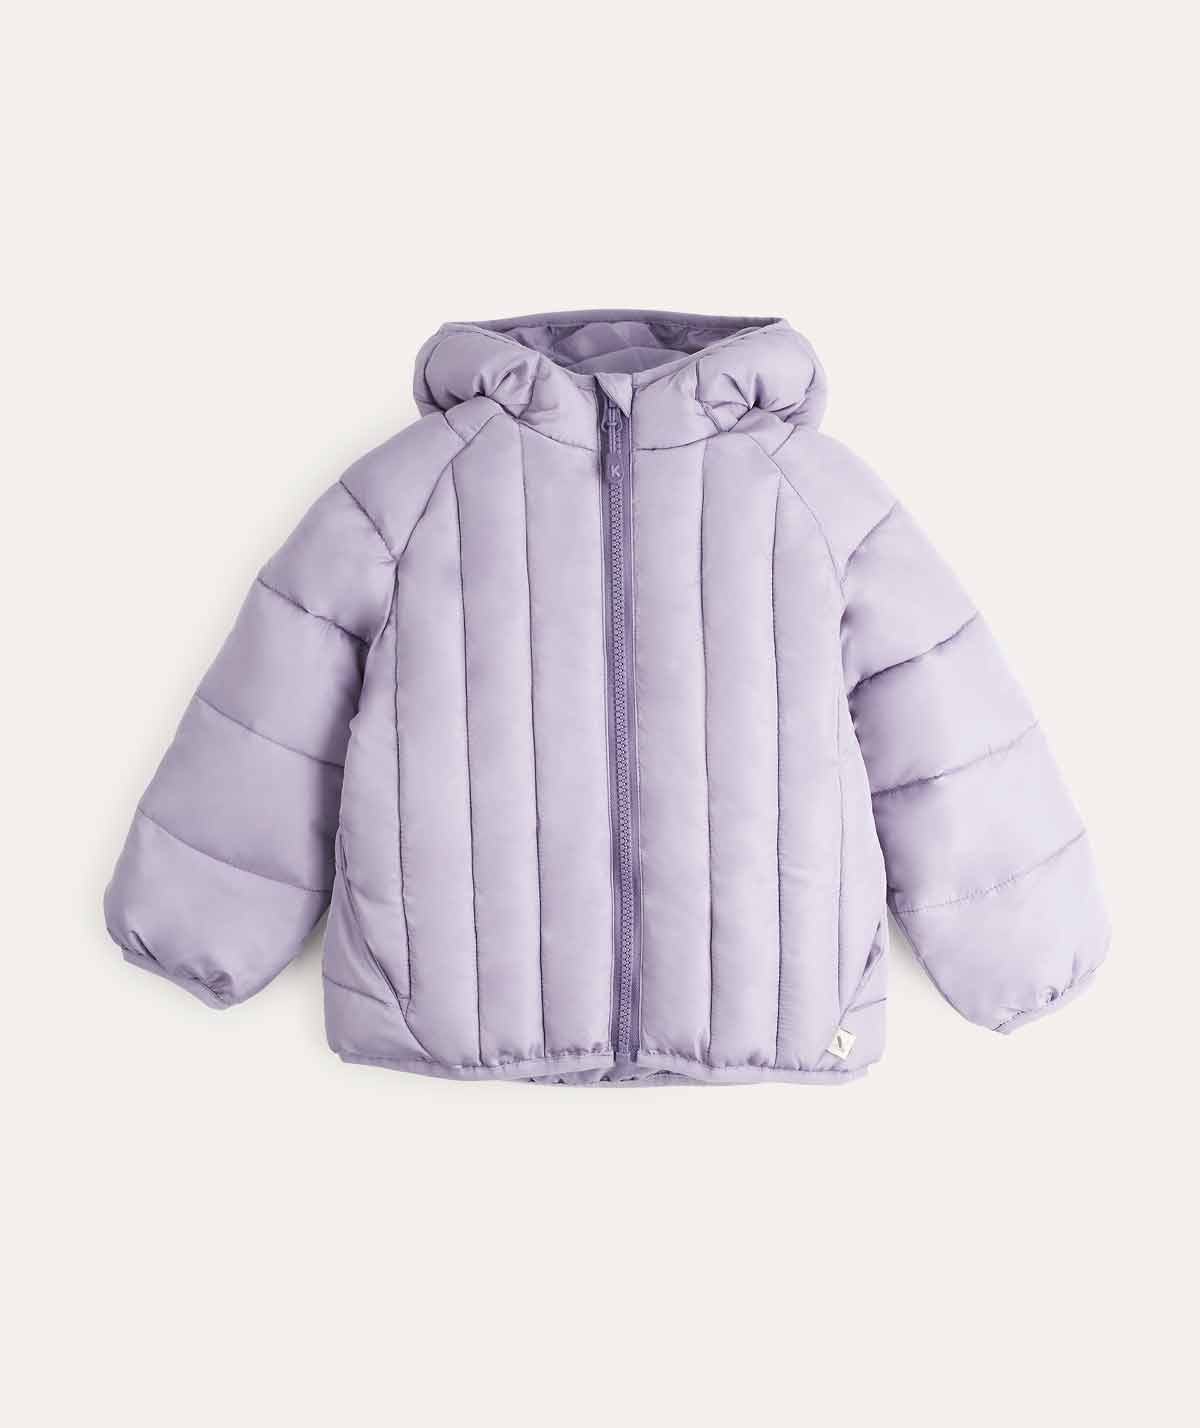 Buy the Purple KIDLY Label Puffer Jacket | KIDLY